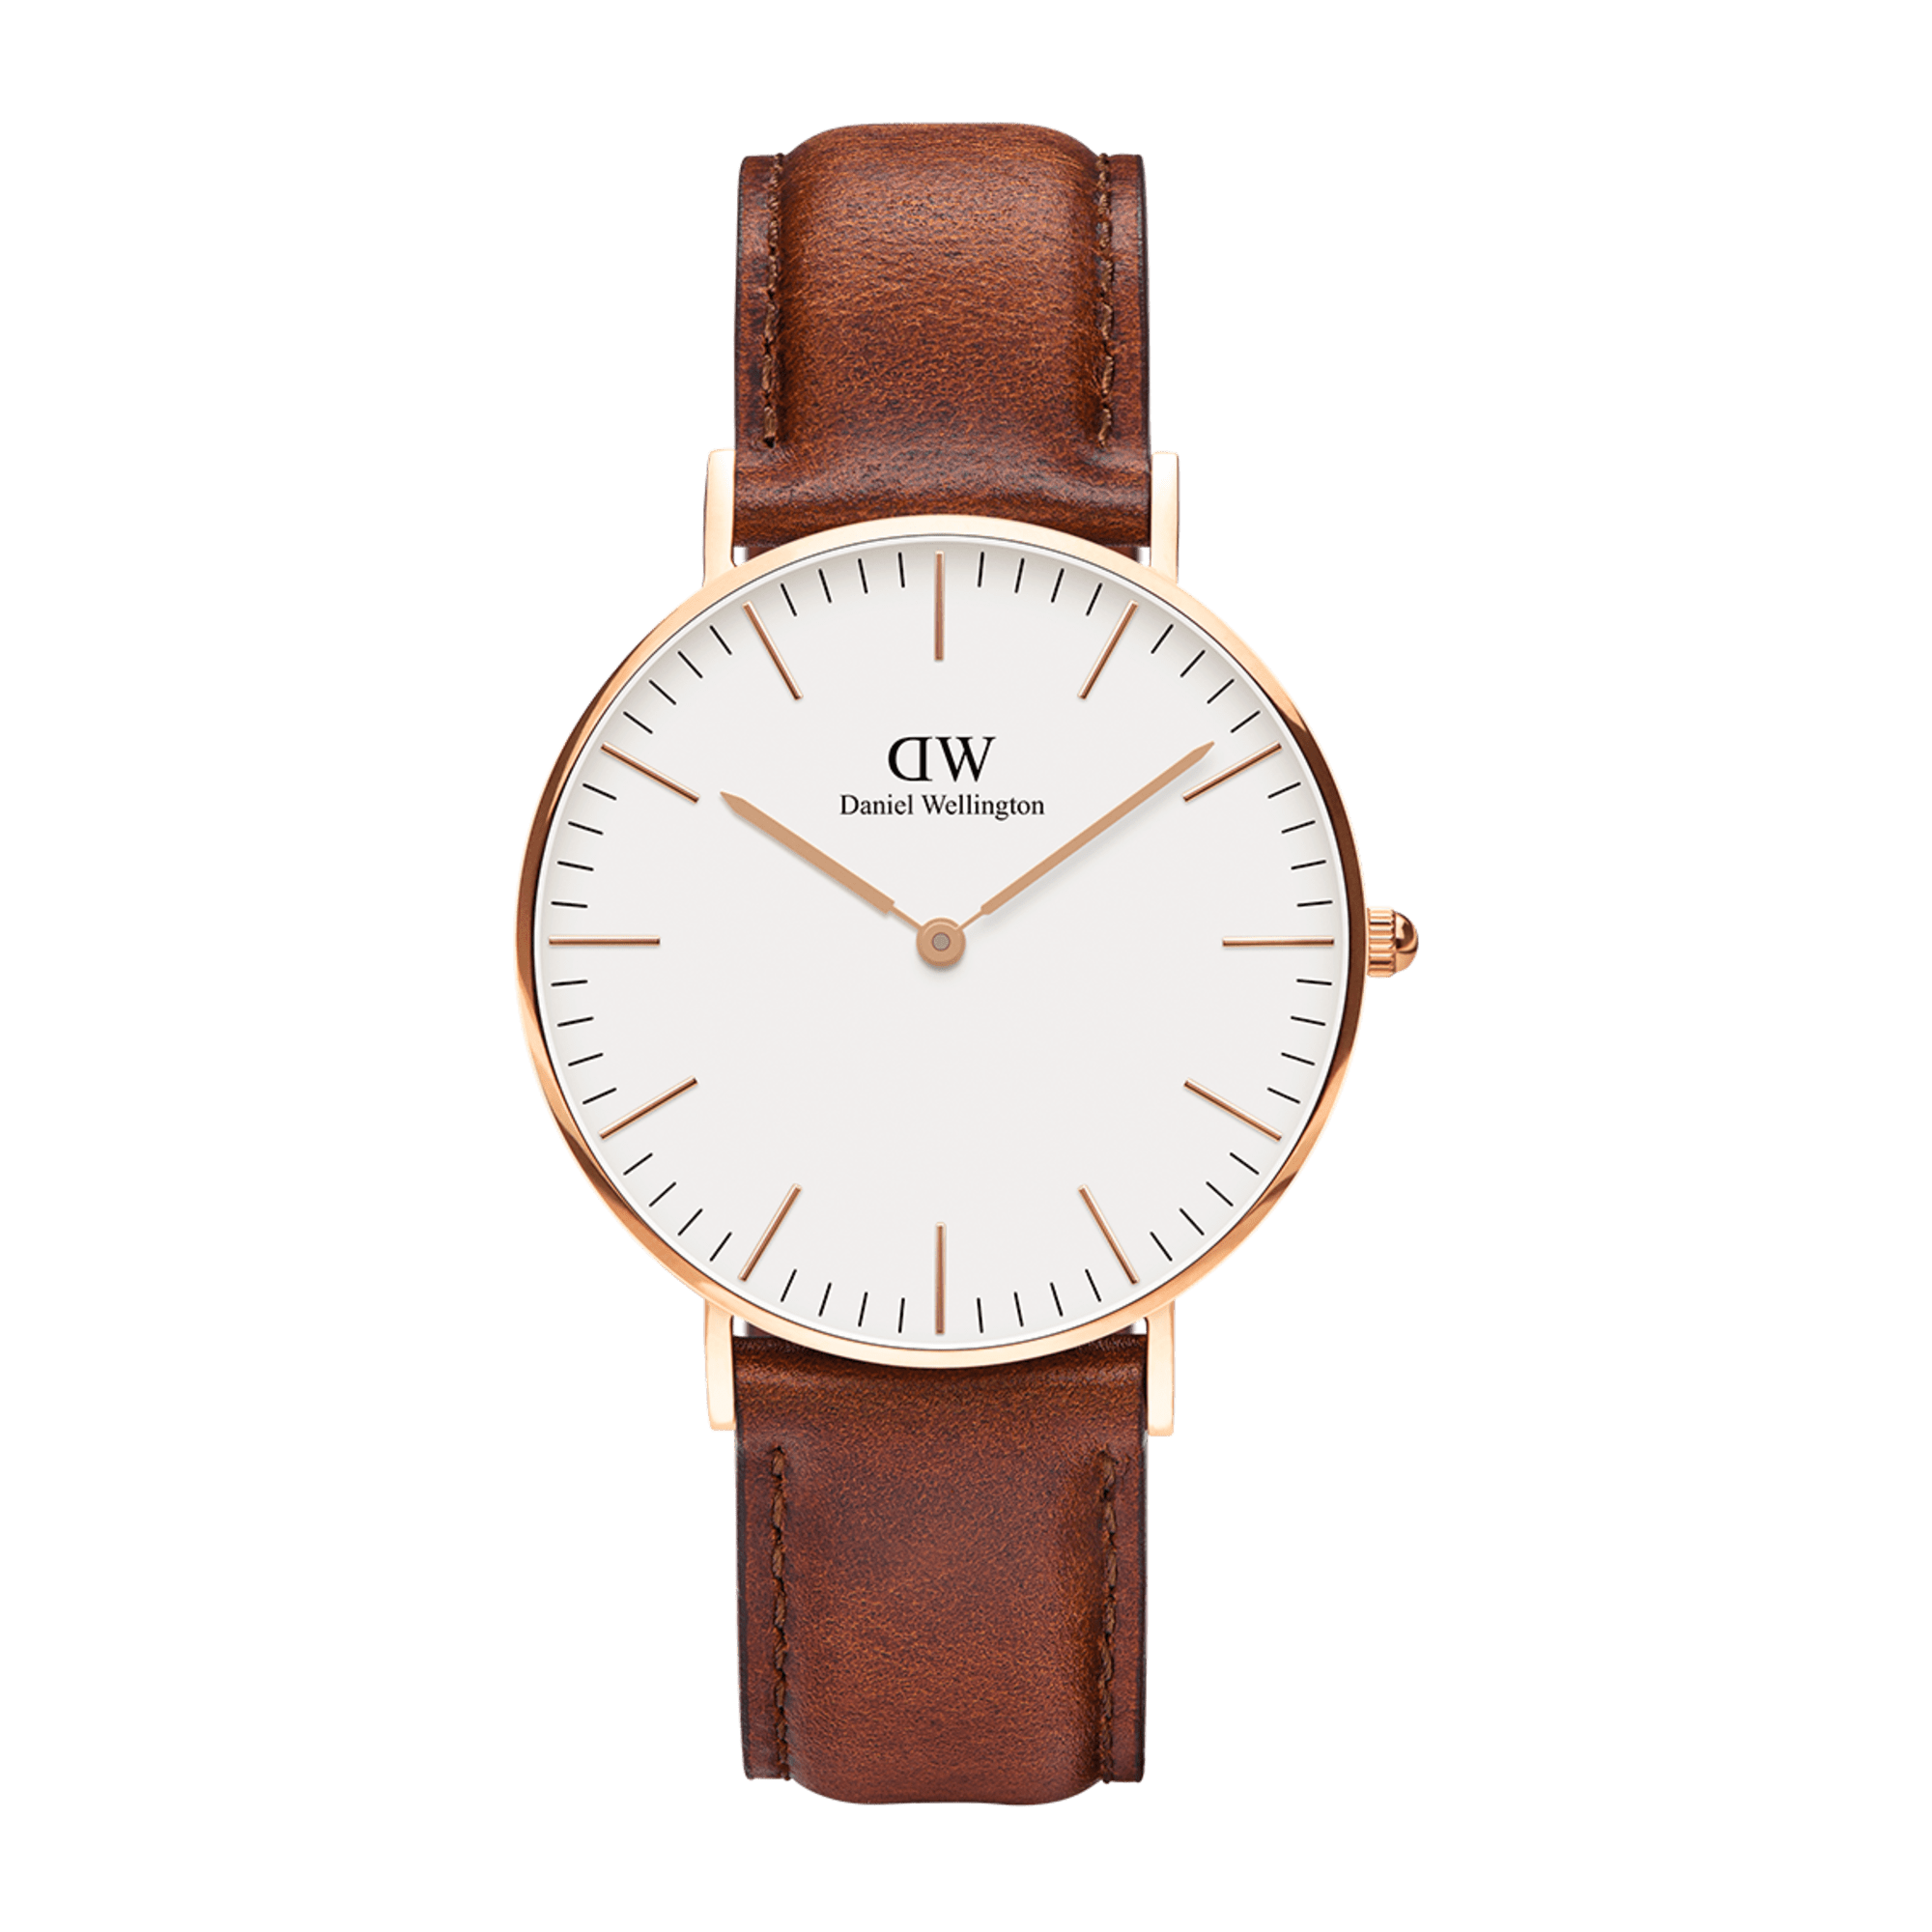 St Mawes - Men's watch in rose gold with leather strap | DW